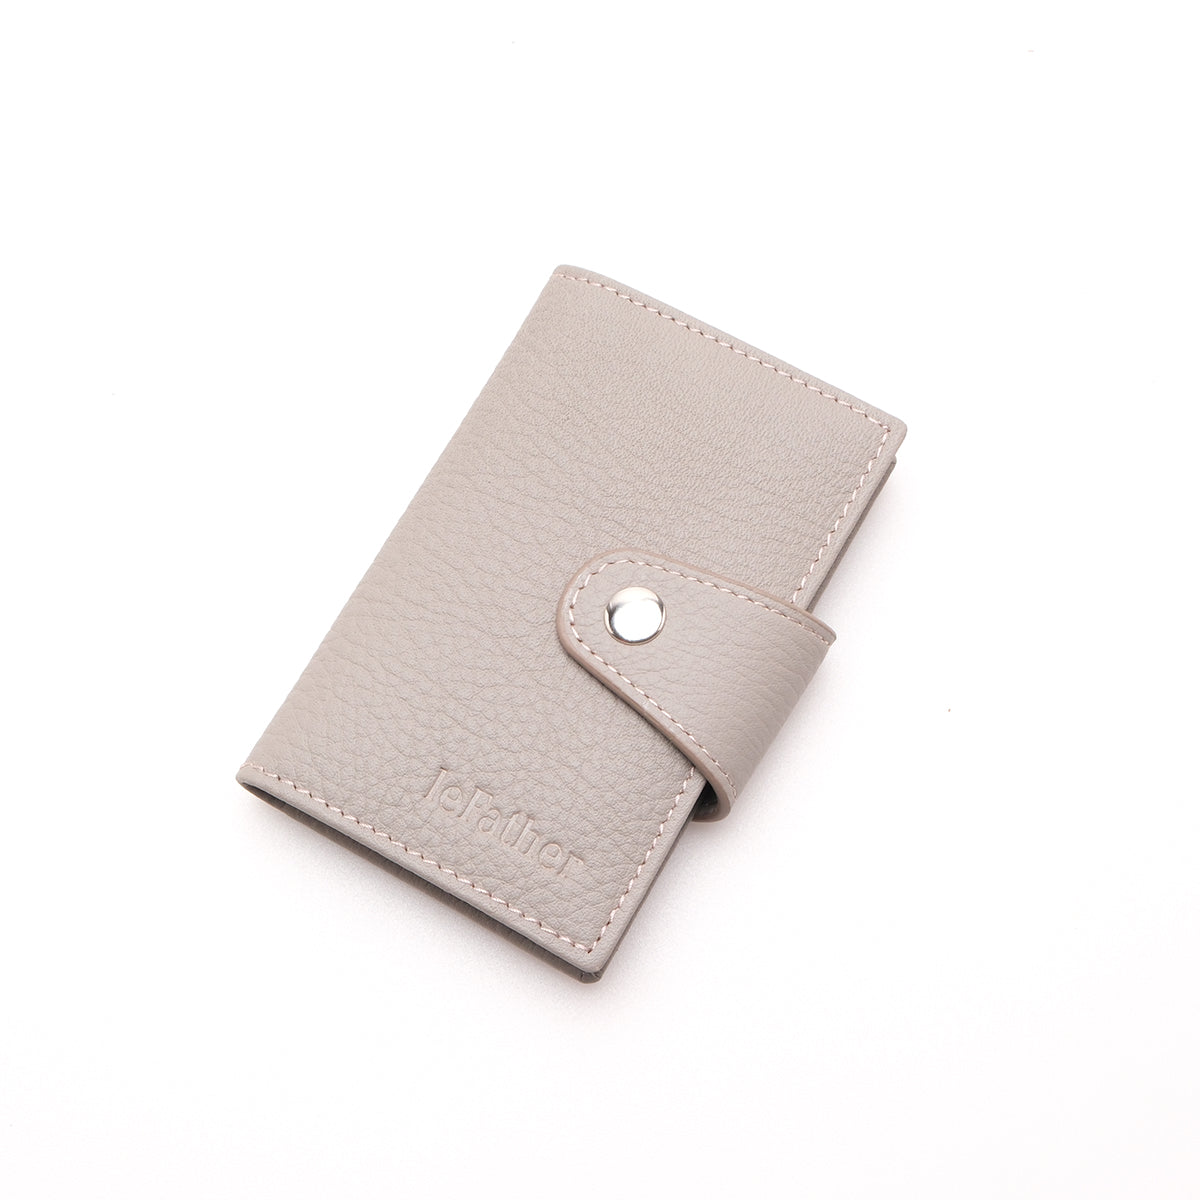 Lefather - Leather Goods Manufacturer - Leather Wallet